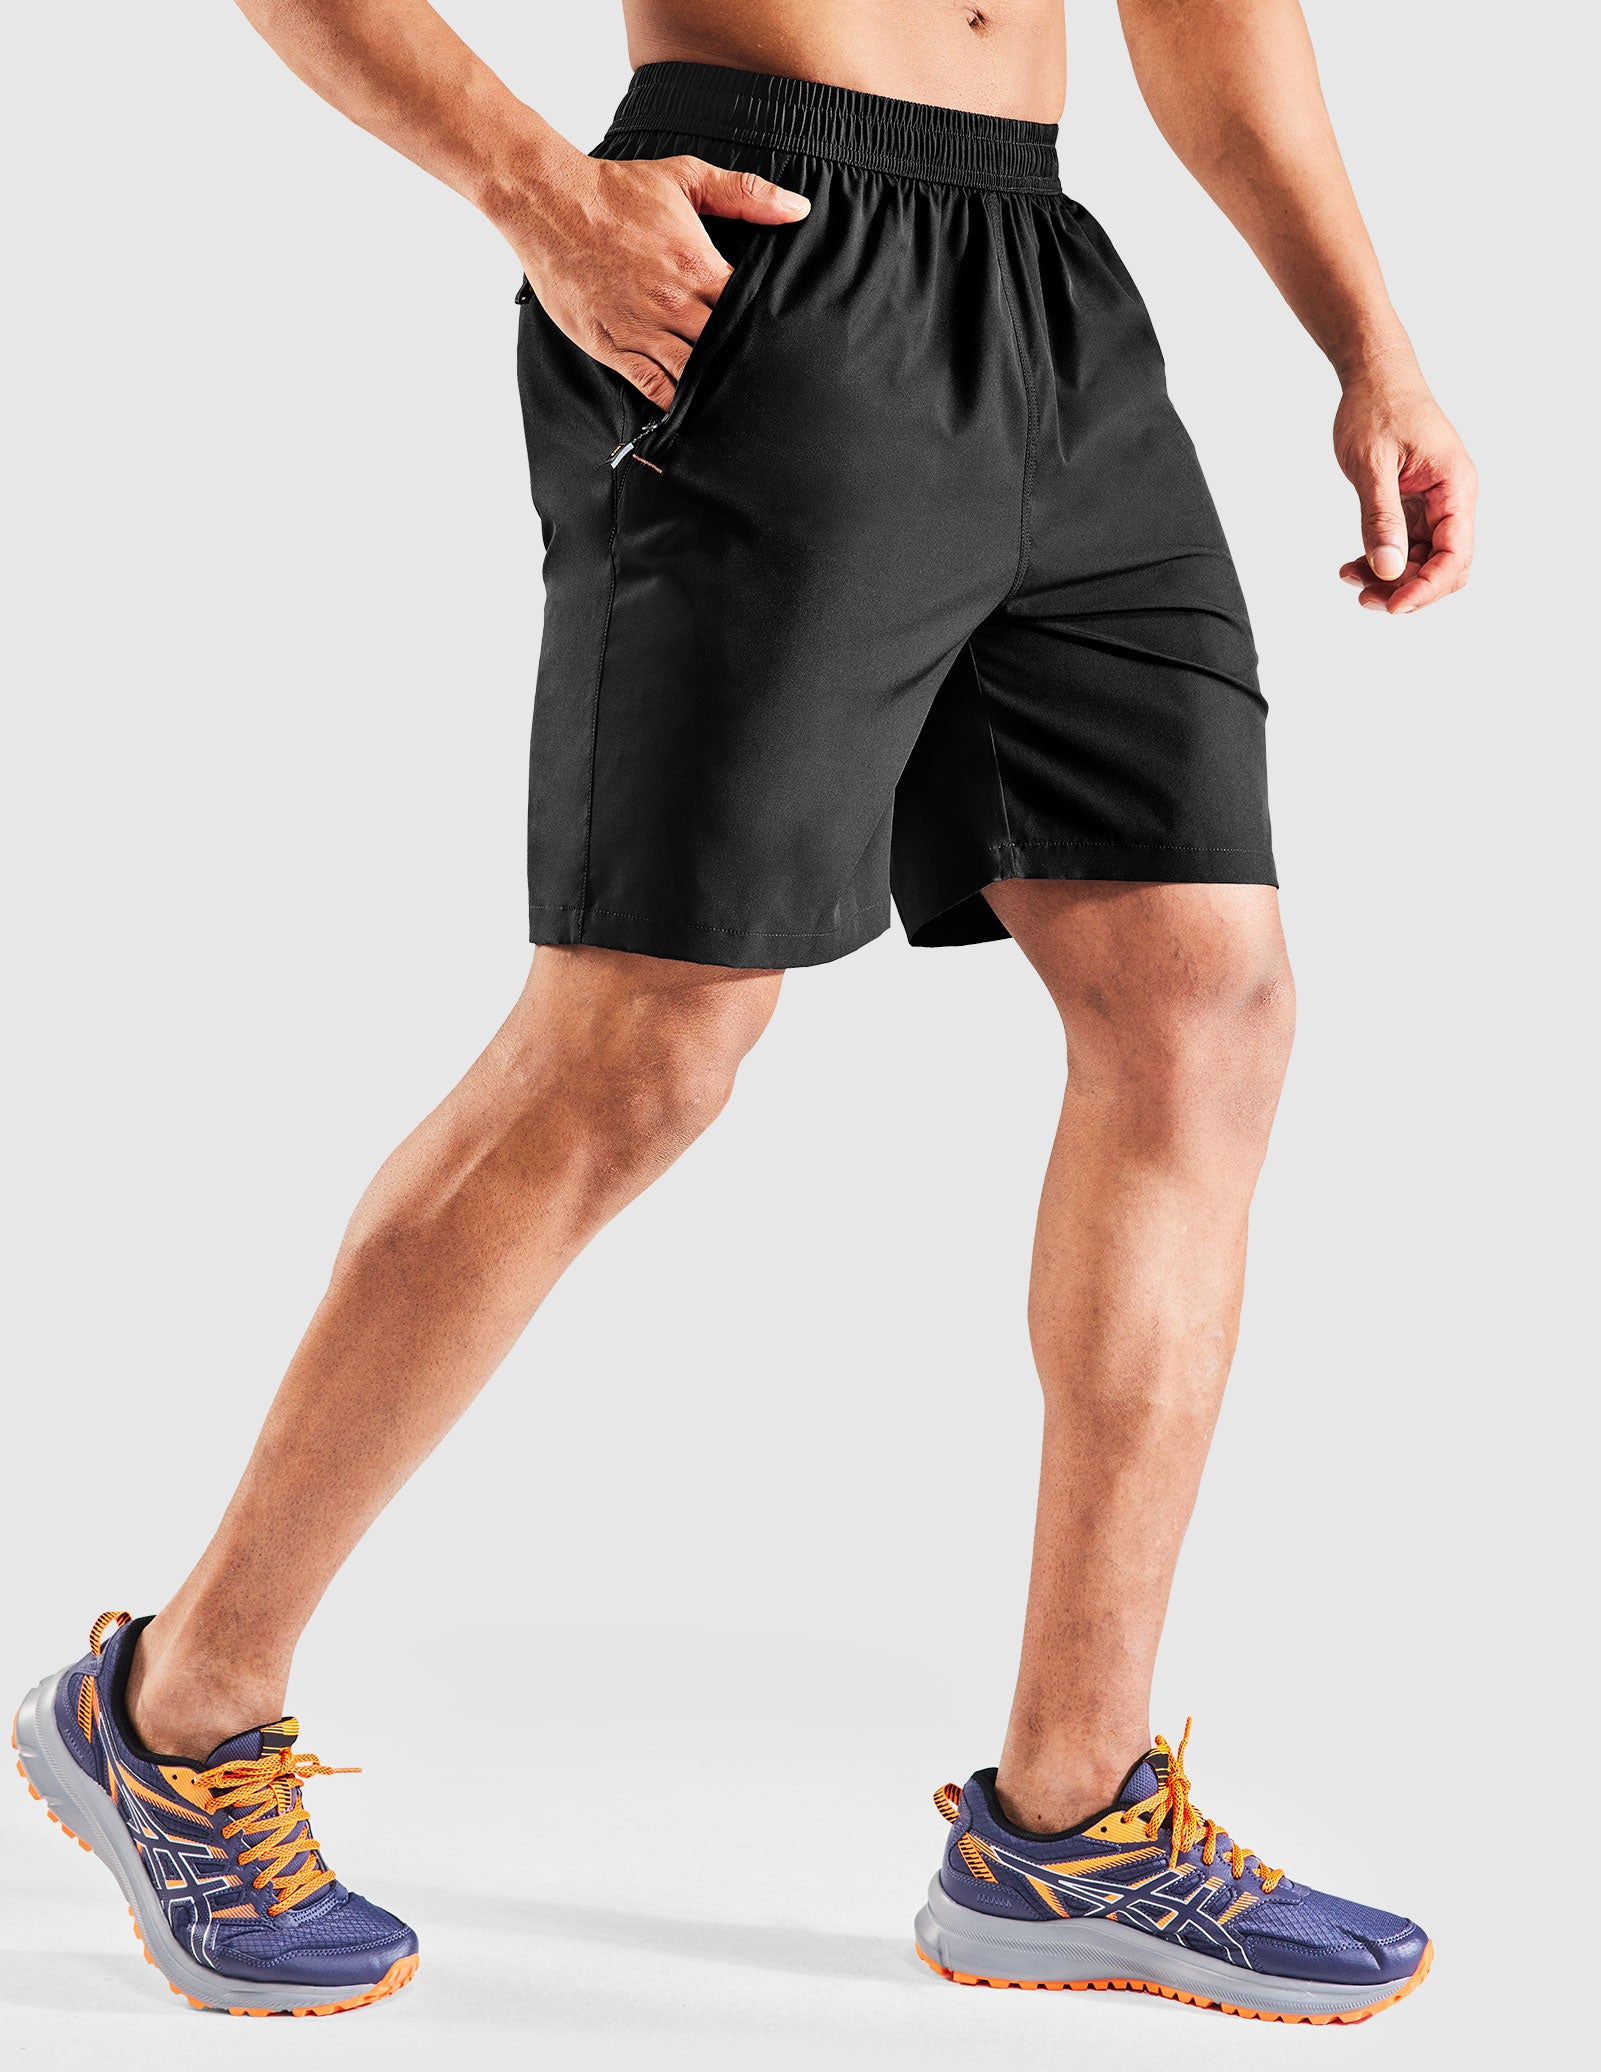 MIER Men Quick Dry Running Shorts with Zipper Pocket 7 Inch